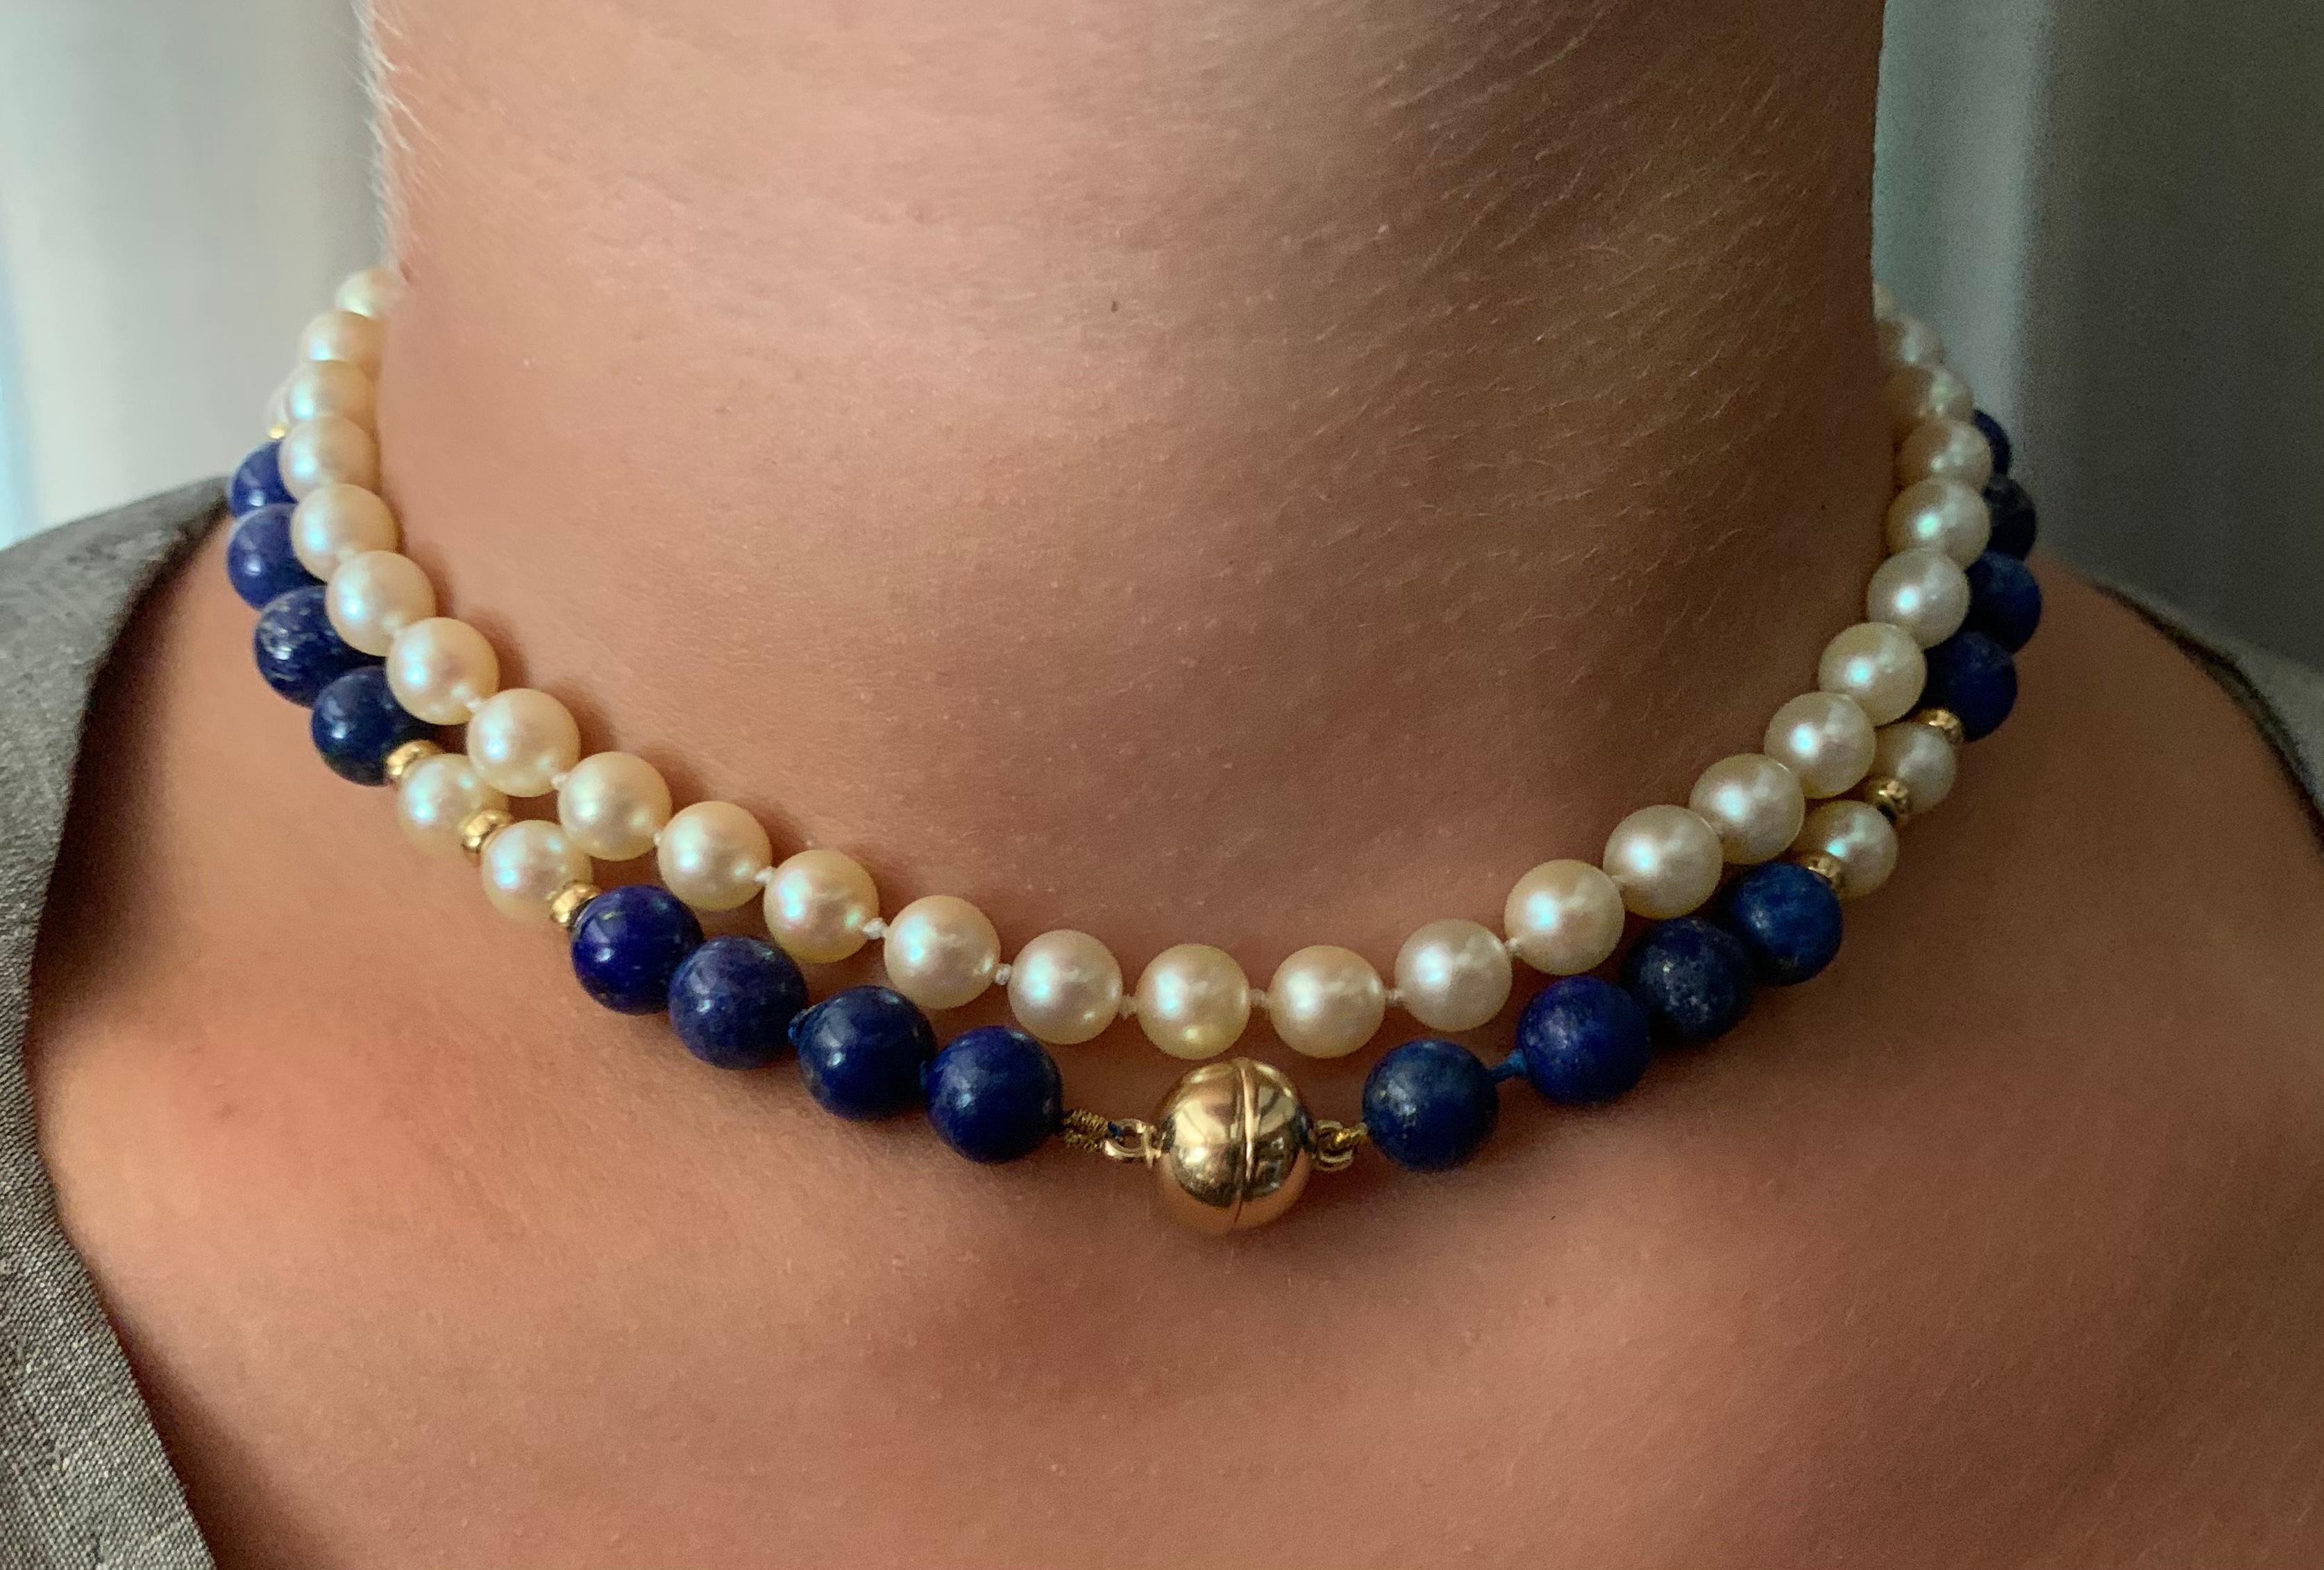 Beautiful, versatile necklace of 14k yellow gold, lapis lazuli and cultured pearls which may be worn four different ways: as a long 725mm (28.5 inch) gold, lapis and pearl necklace, as a double strand necklace, as a 370 mm (14.5 inch) lapis, gold